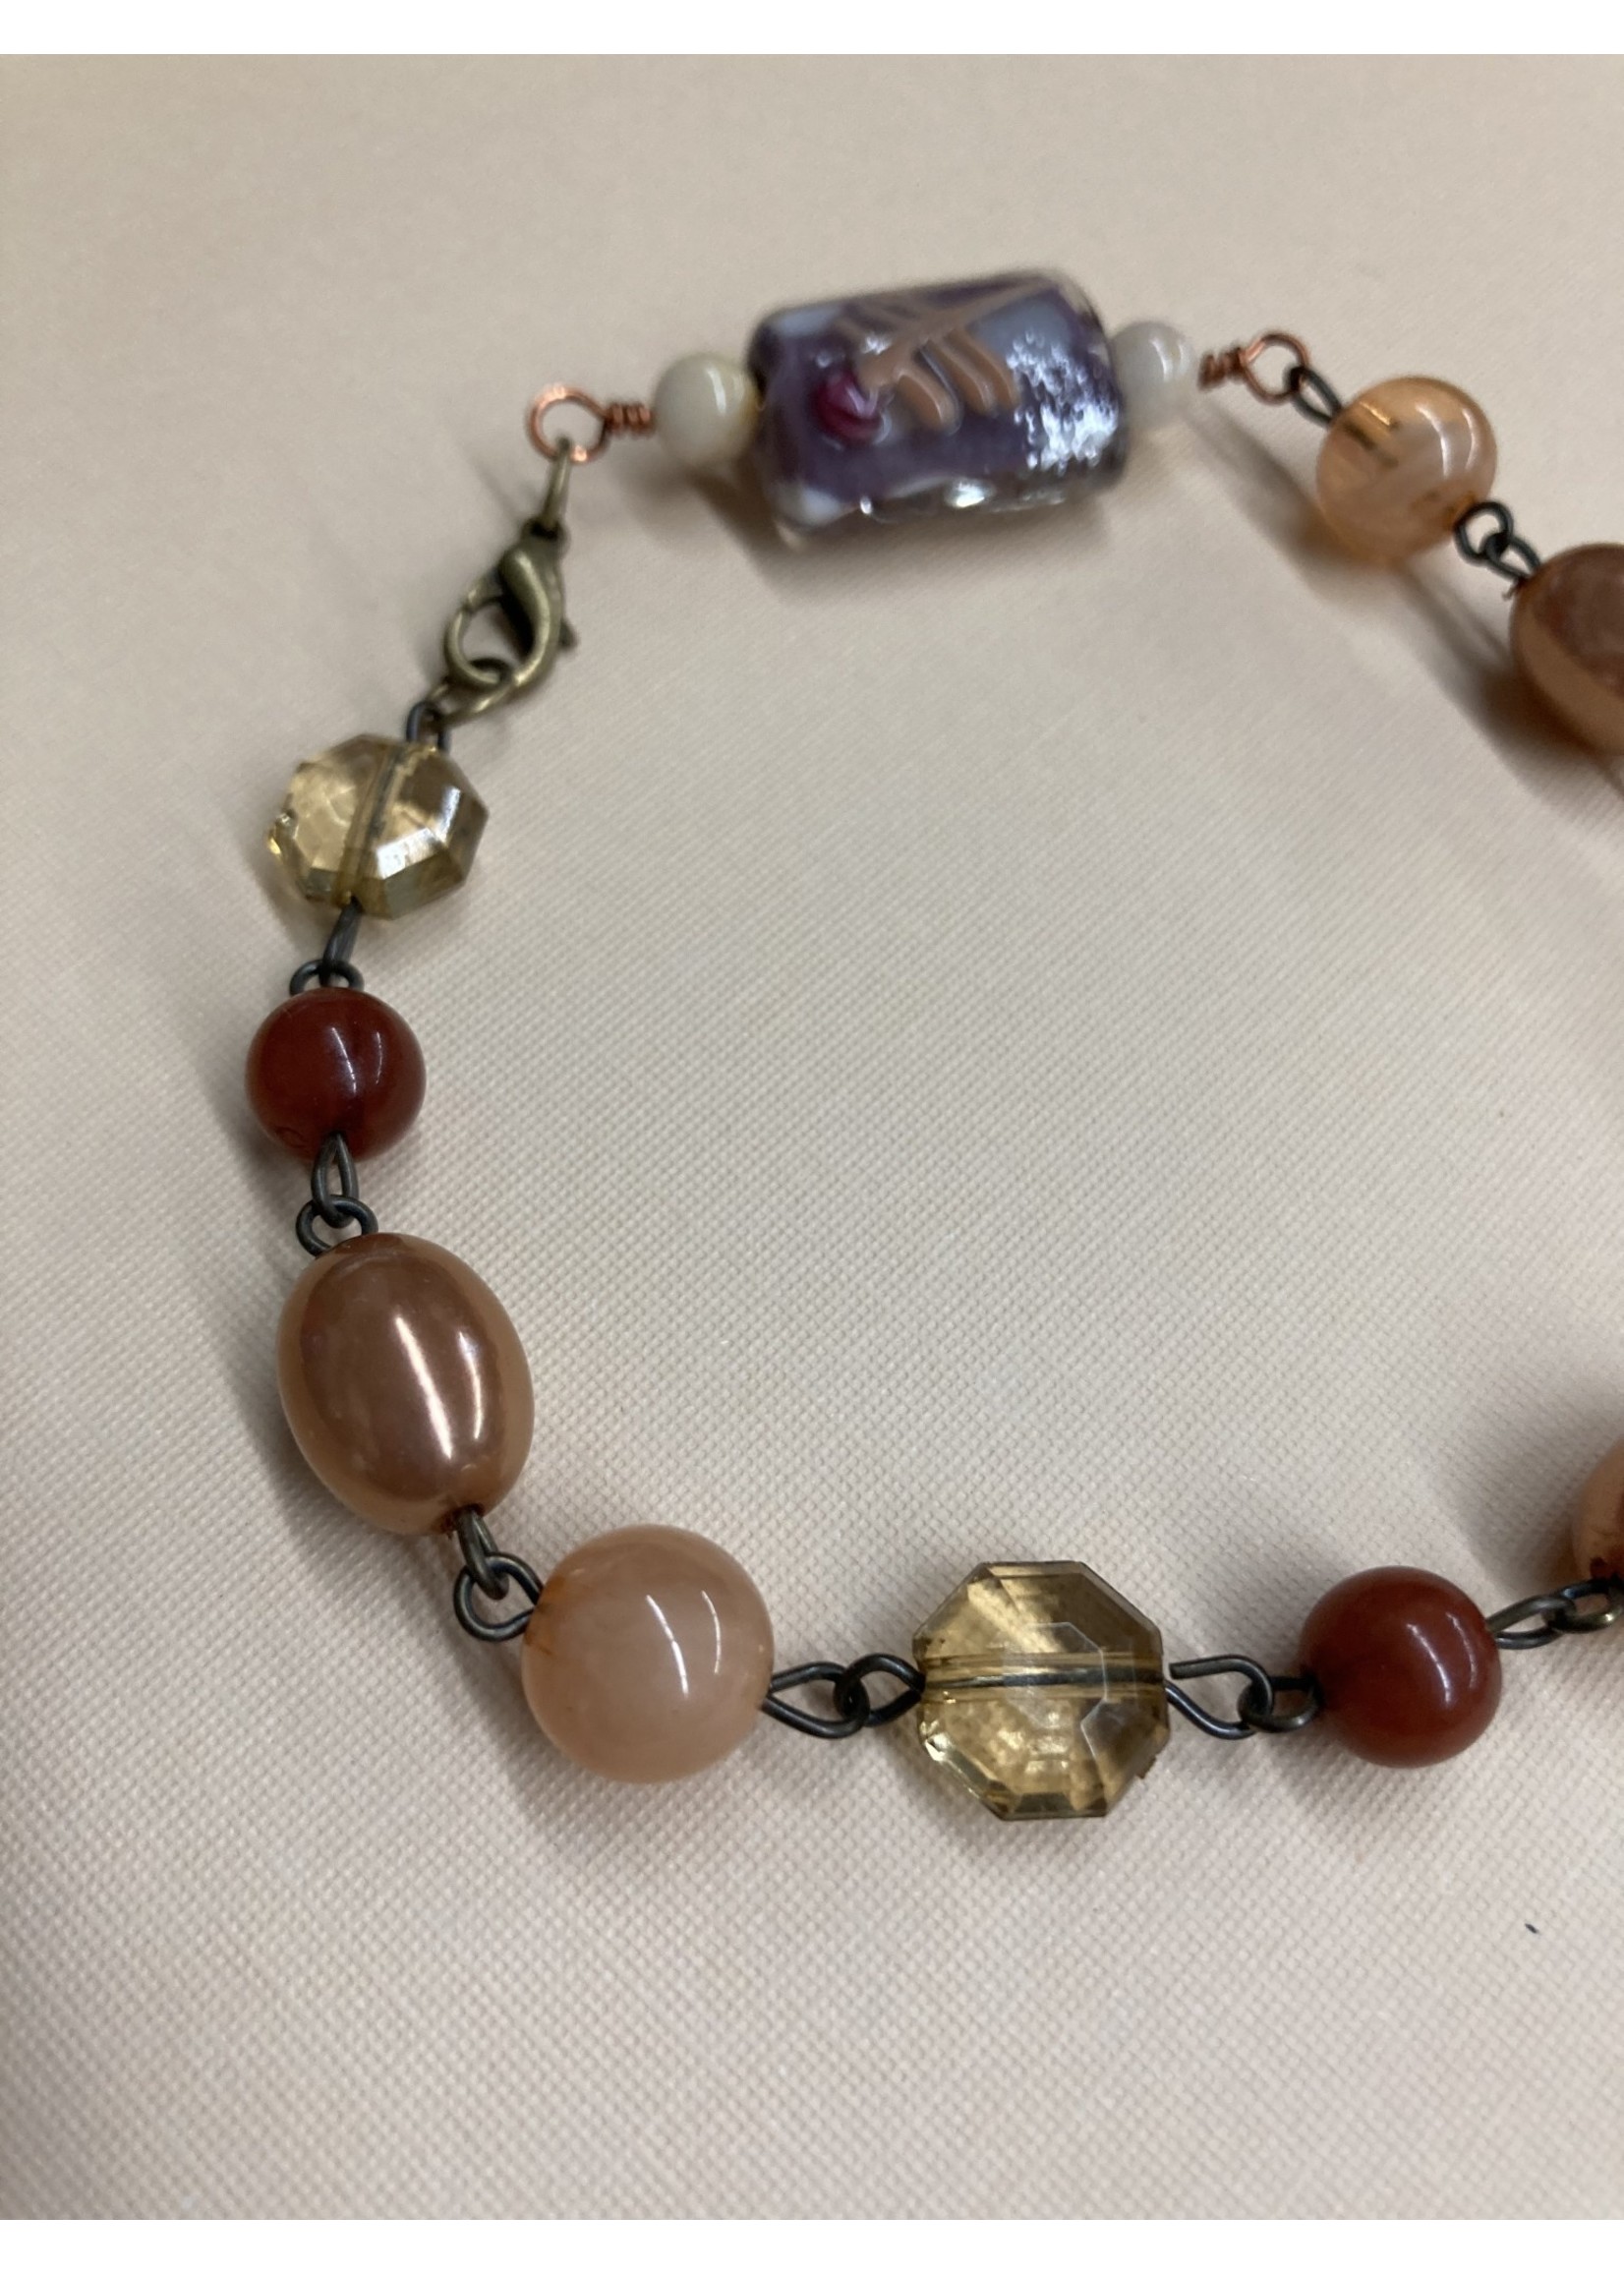 Our Twisted Dahlia B010 Amber, Tan, and Lampworked Focal Bracelet